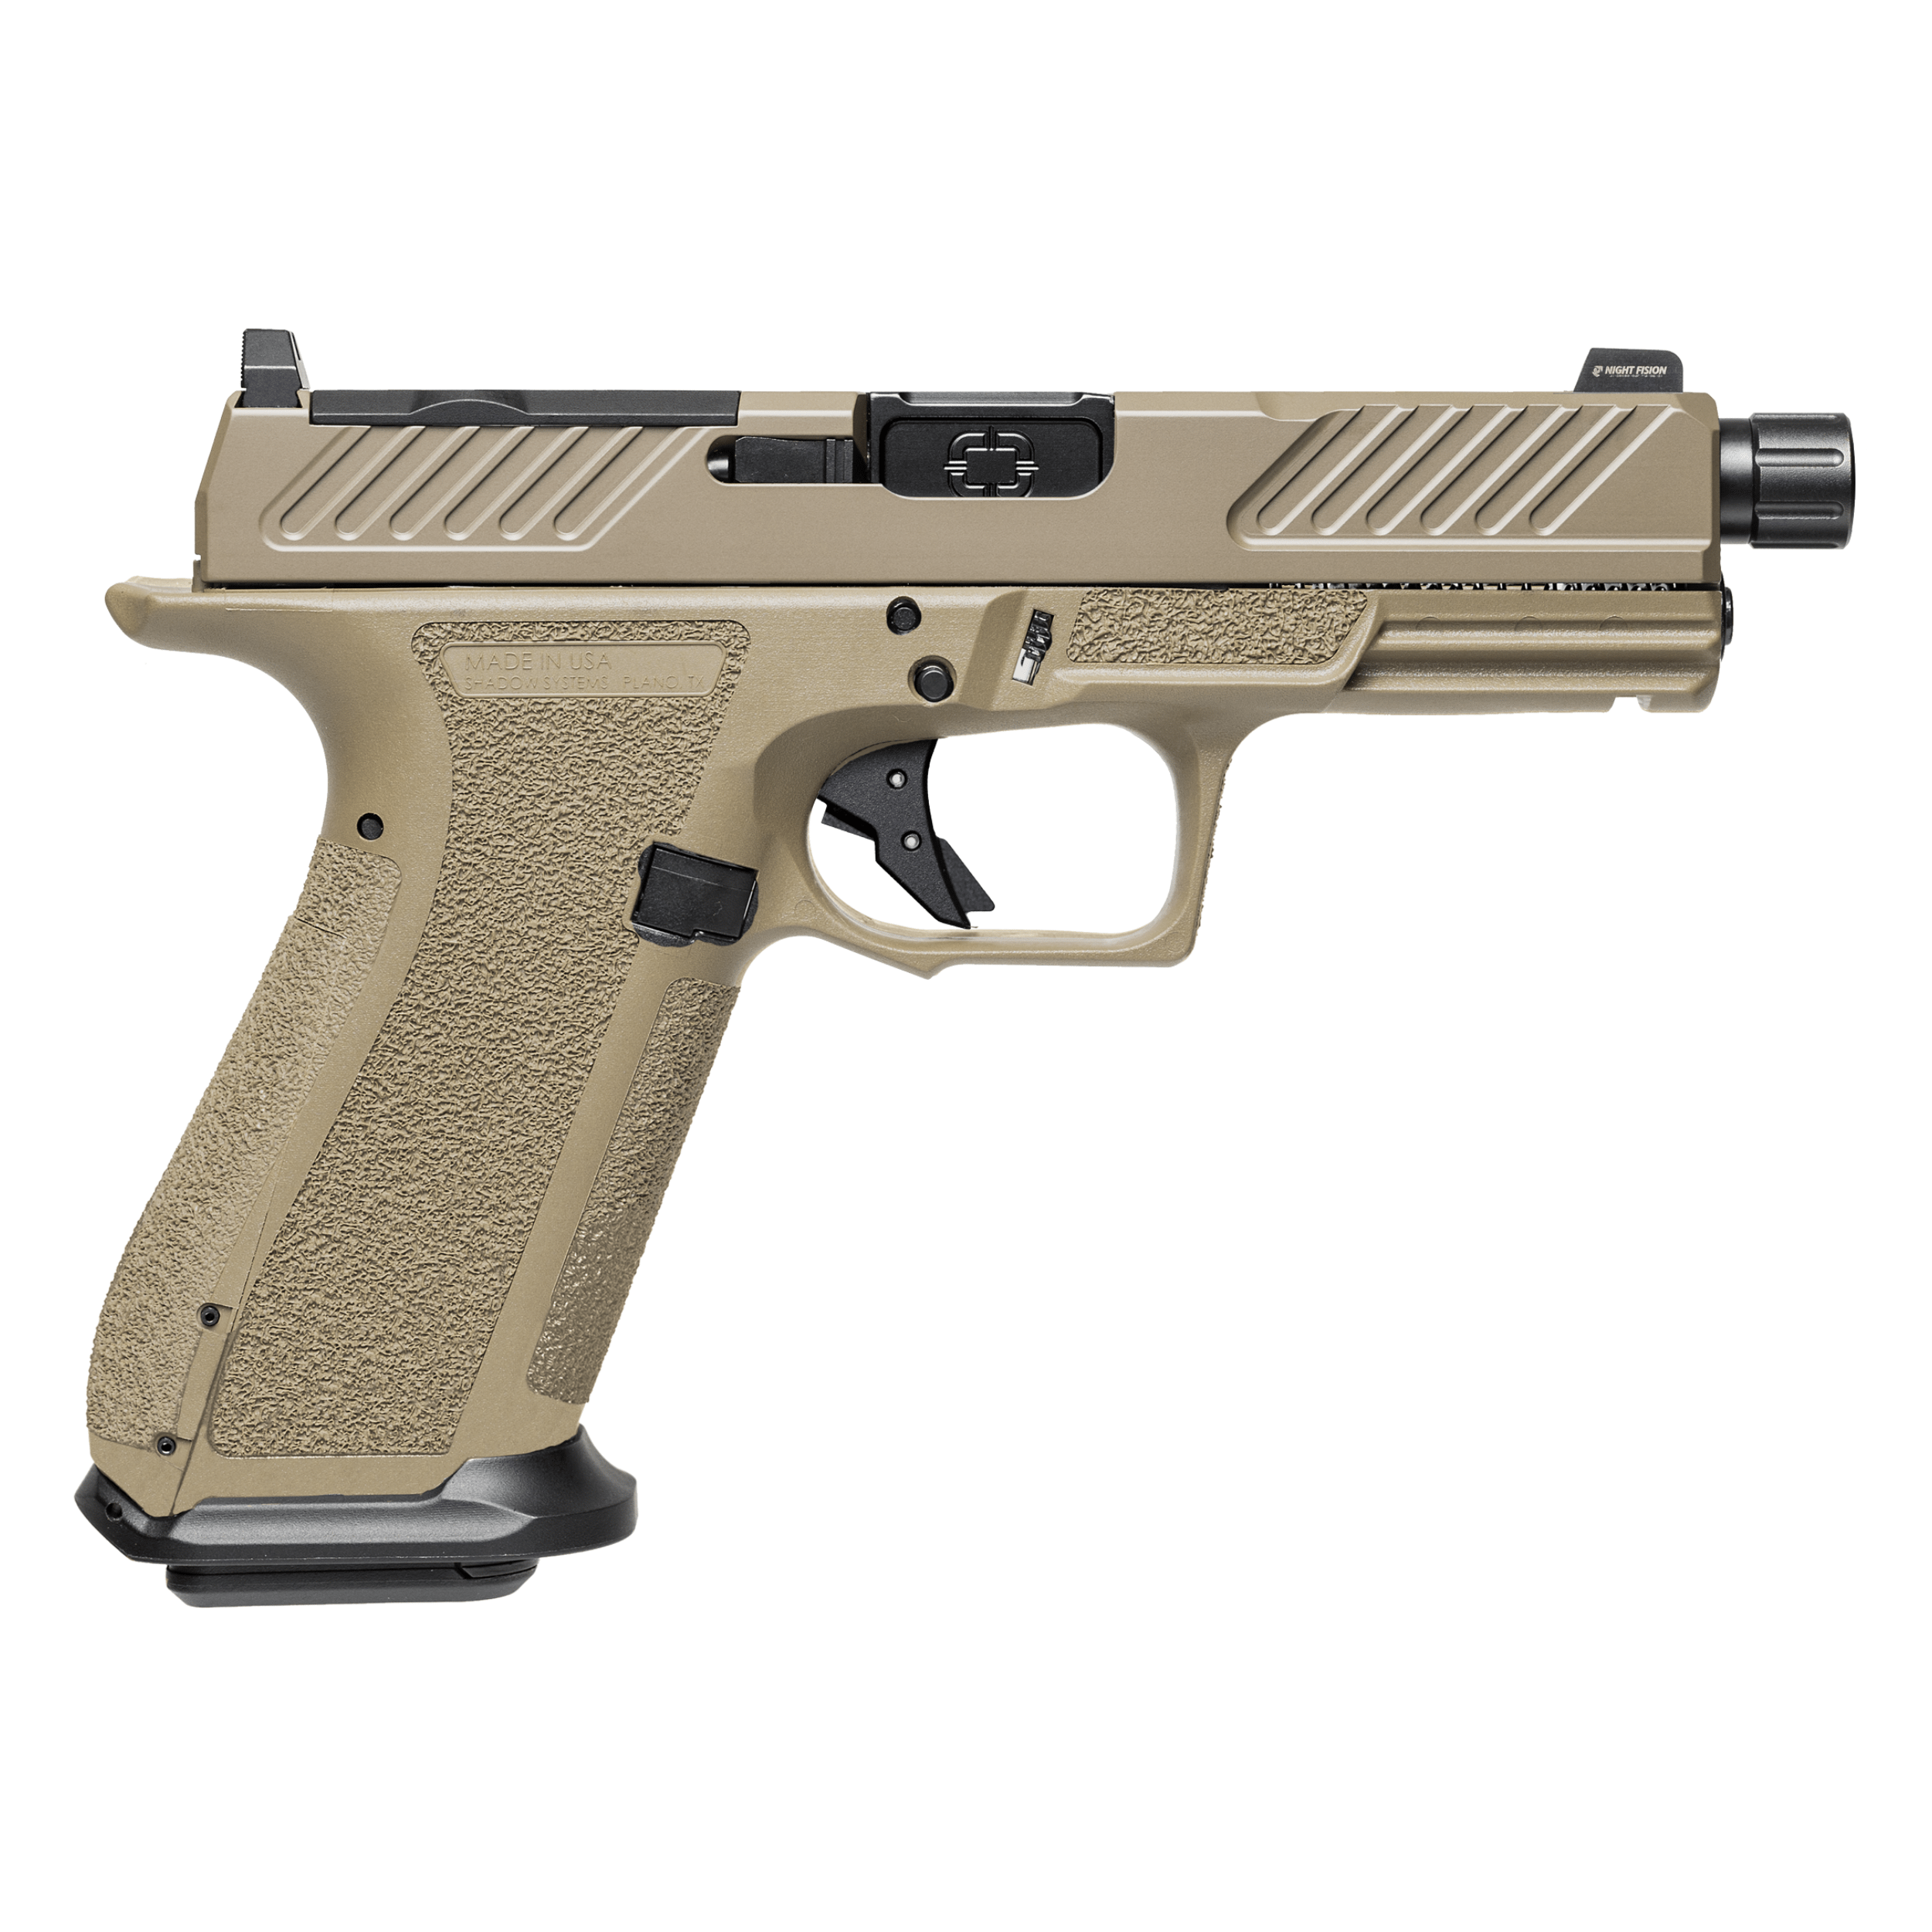 Shadow Systems XR920 Compact SD ready 9mm